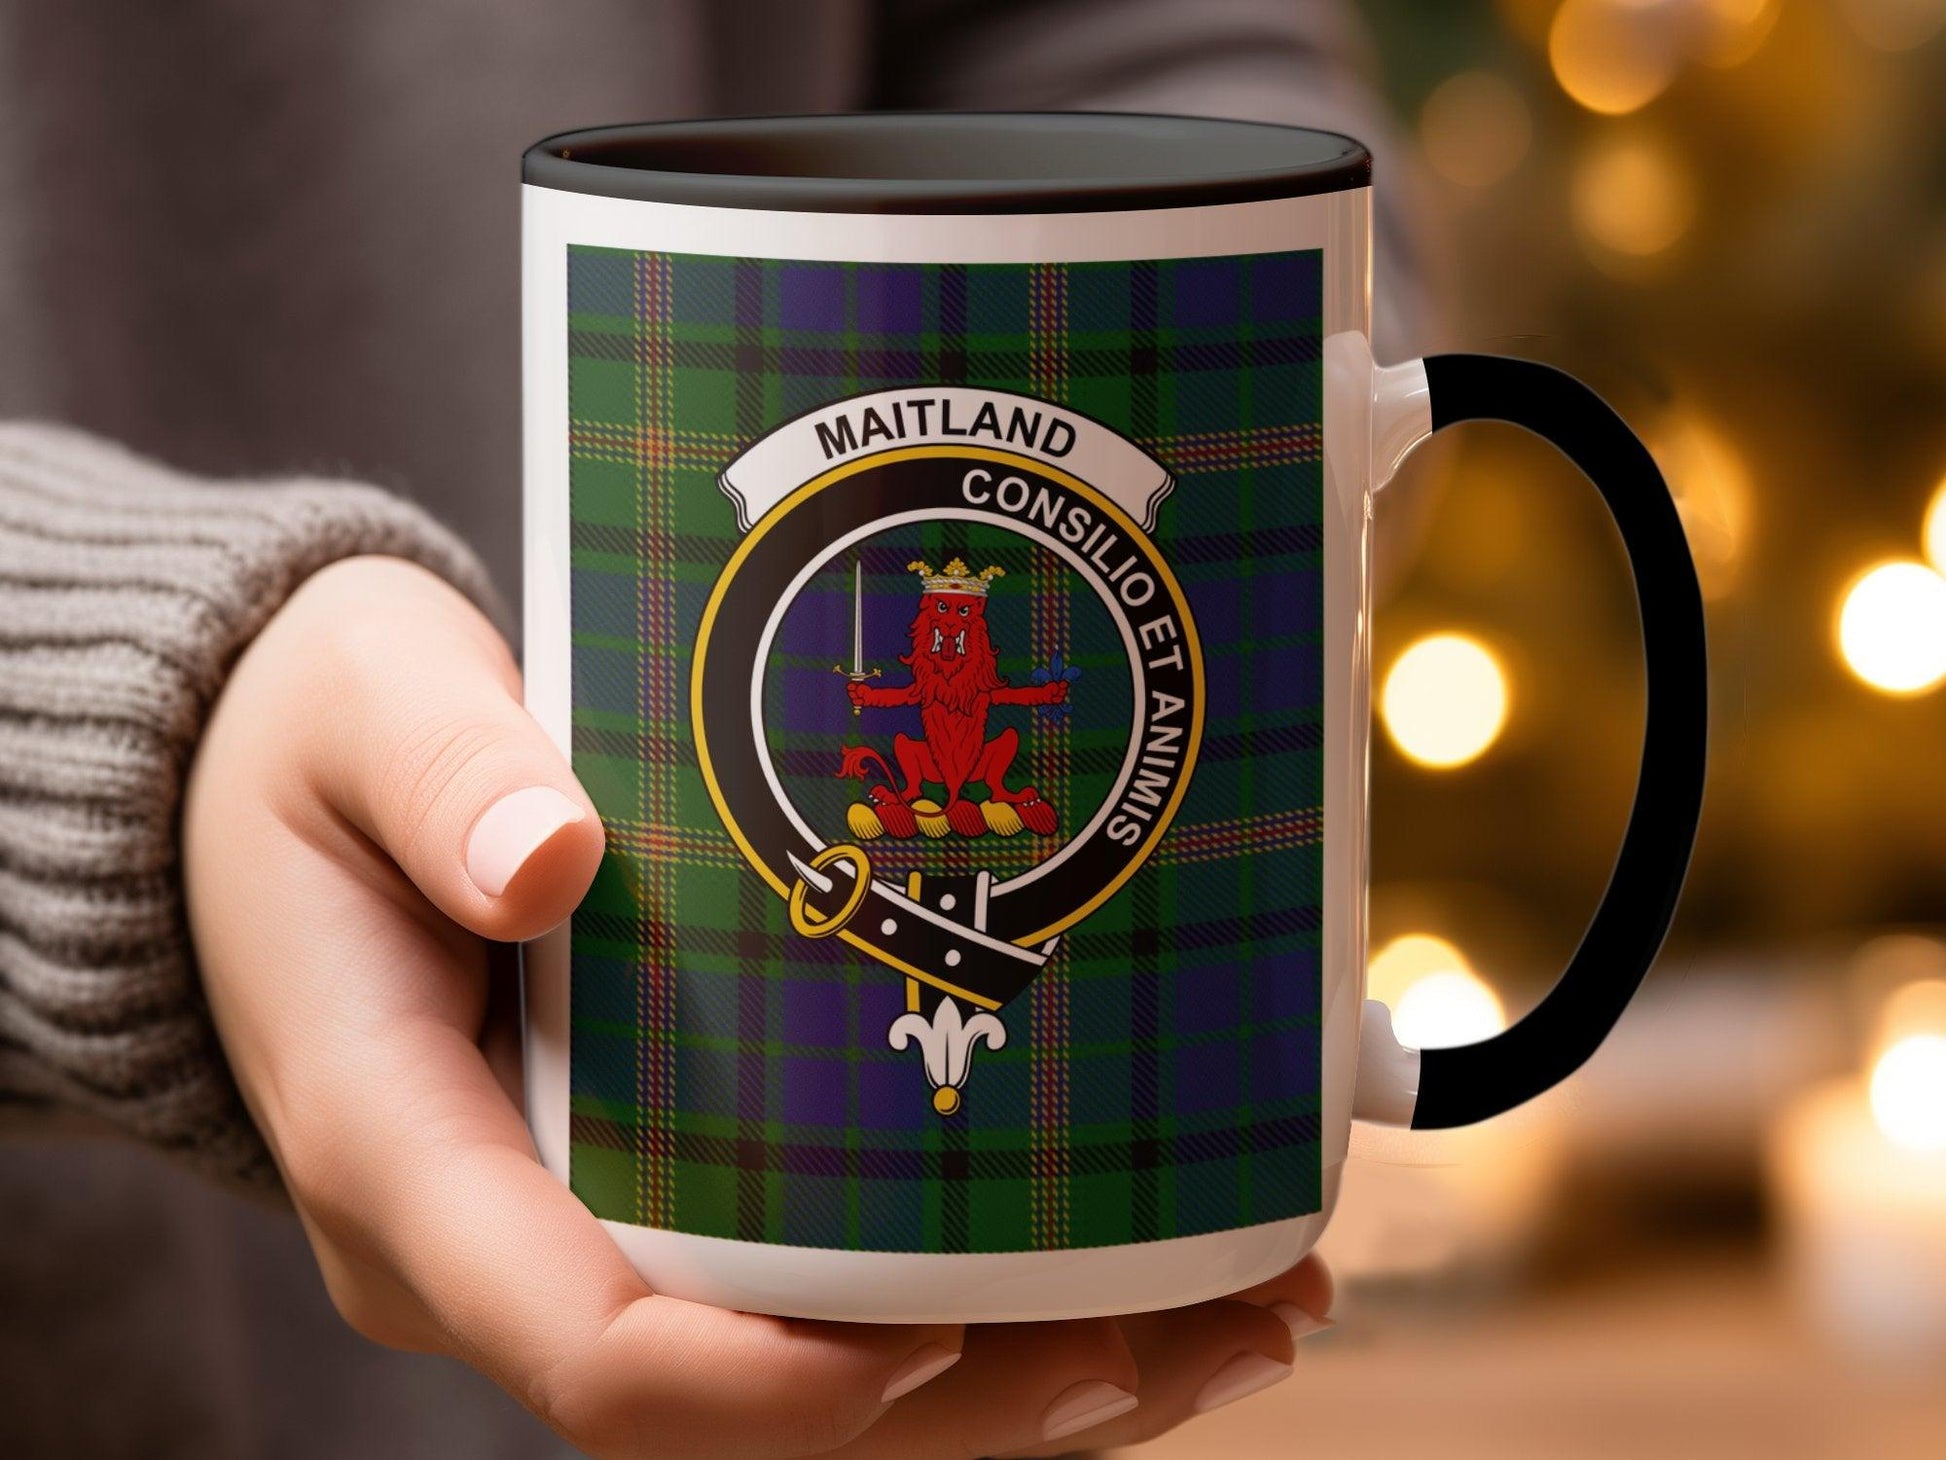 Maitland Clan Crest Tartan Mug with Traditional Design - Living Stone Gifts